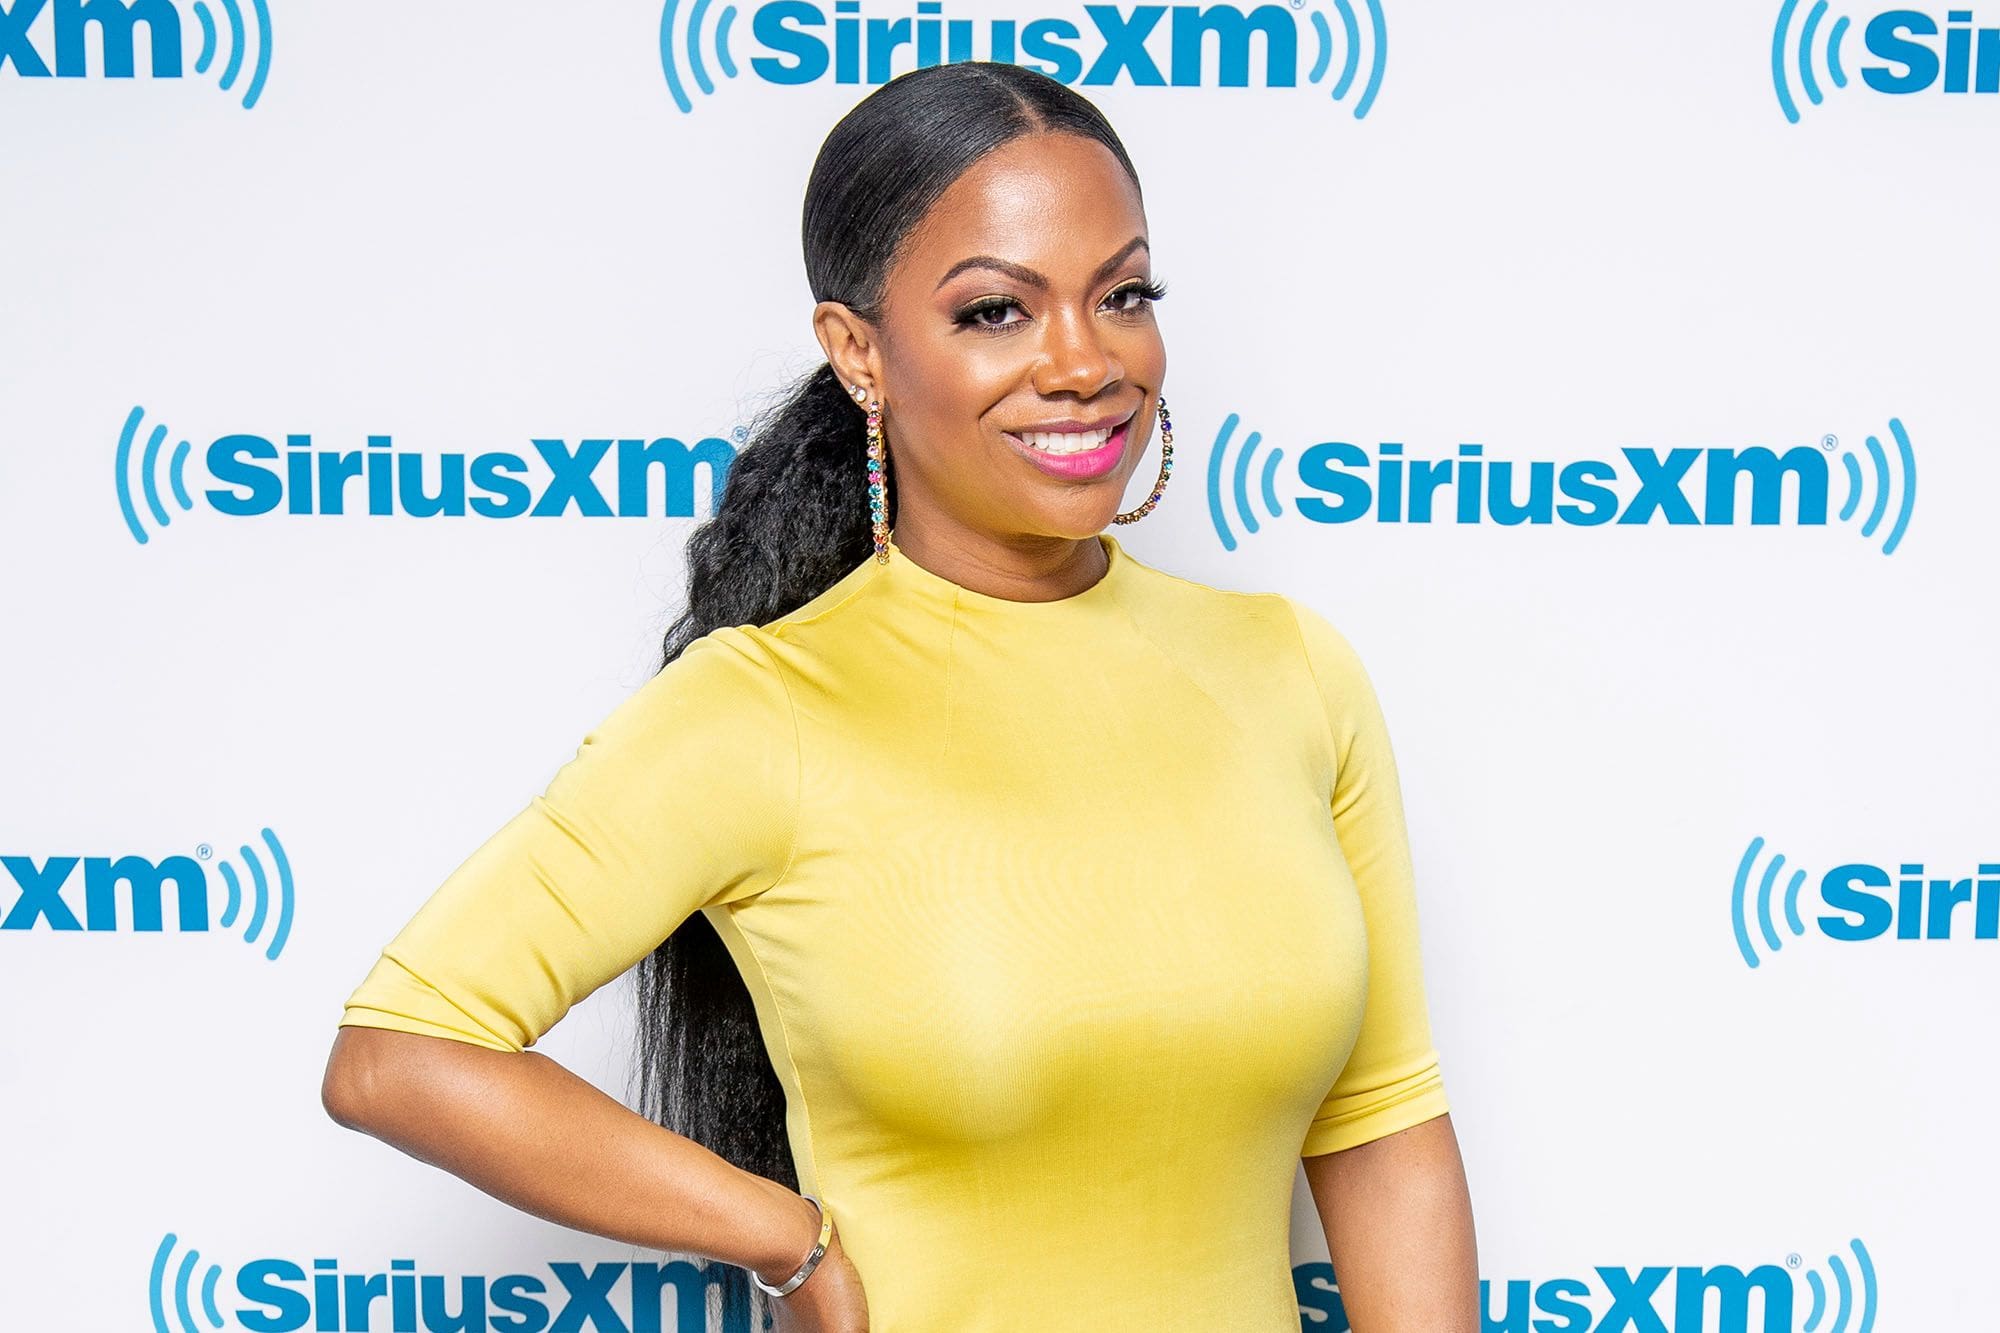 Kandi Burruss Talks About Her 'Welcome To The Dungeon' Tour With Jenny McCarthy & Donnie Wahlberg - Watch The Clips And Find Out Why Fans Say Jenny Disrespected Kandi